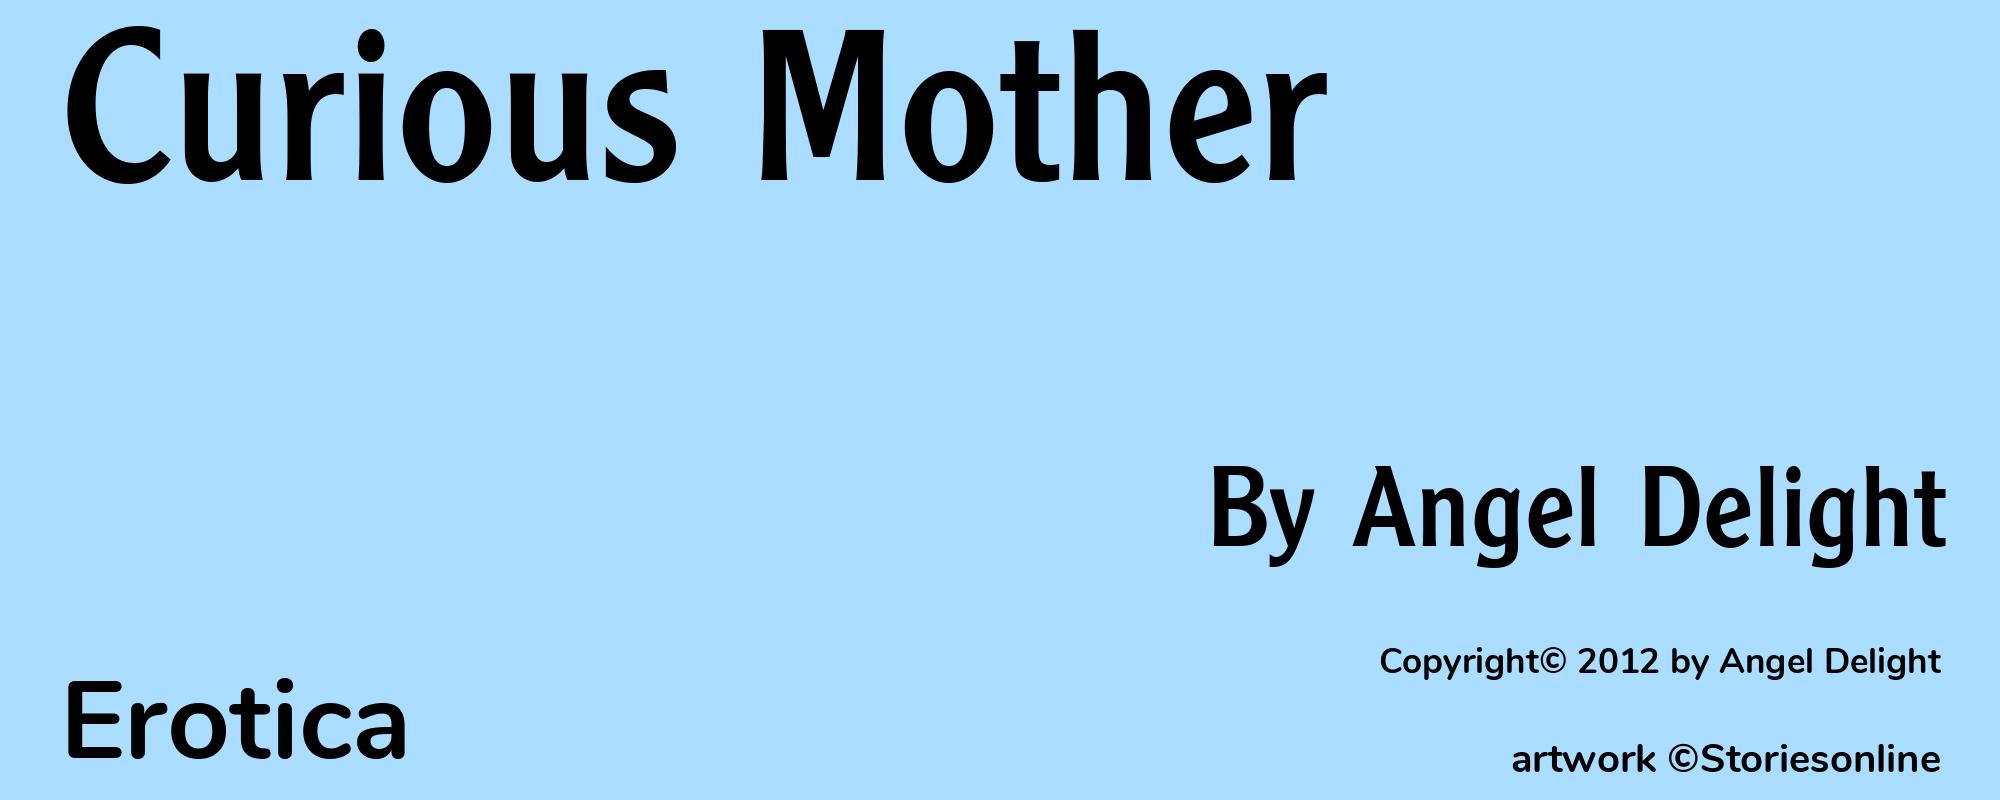 Curious Mother - Cover